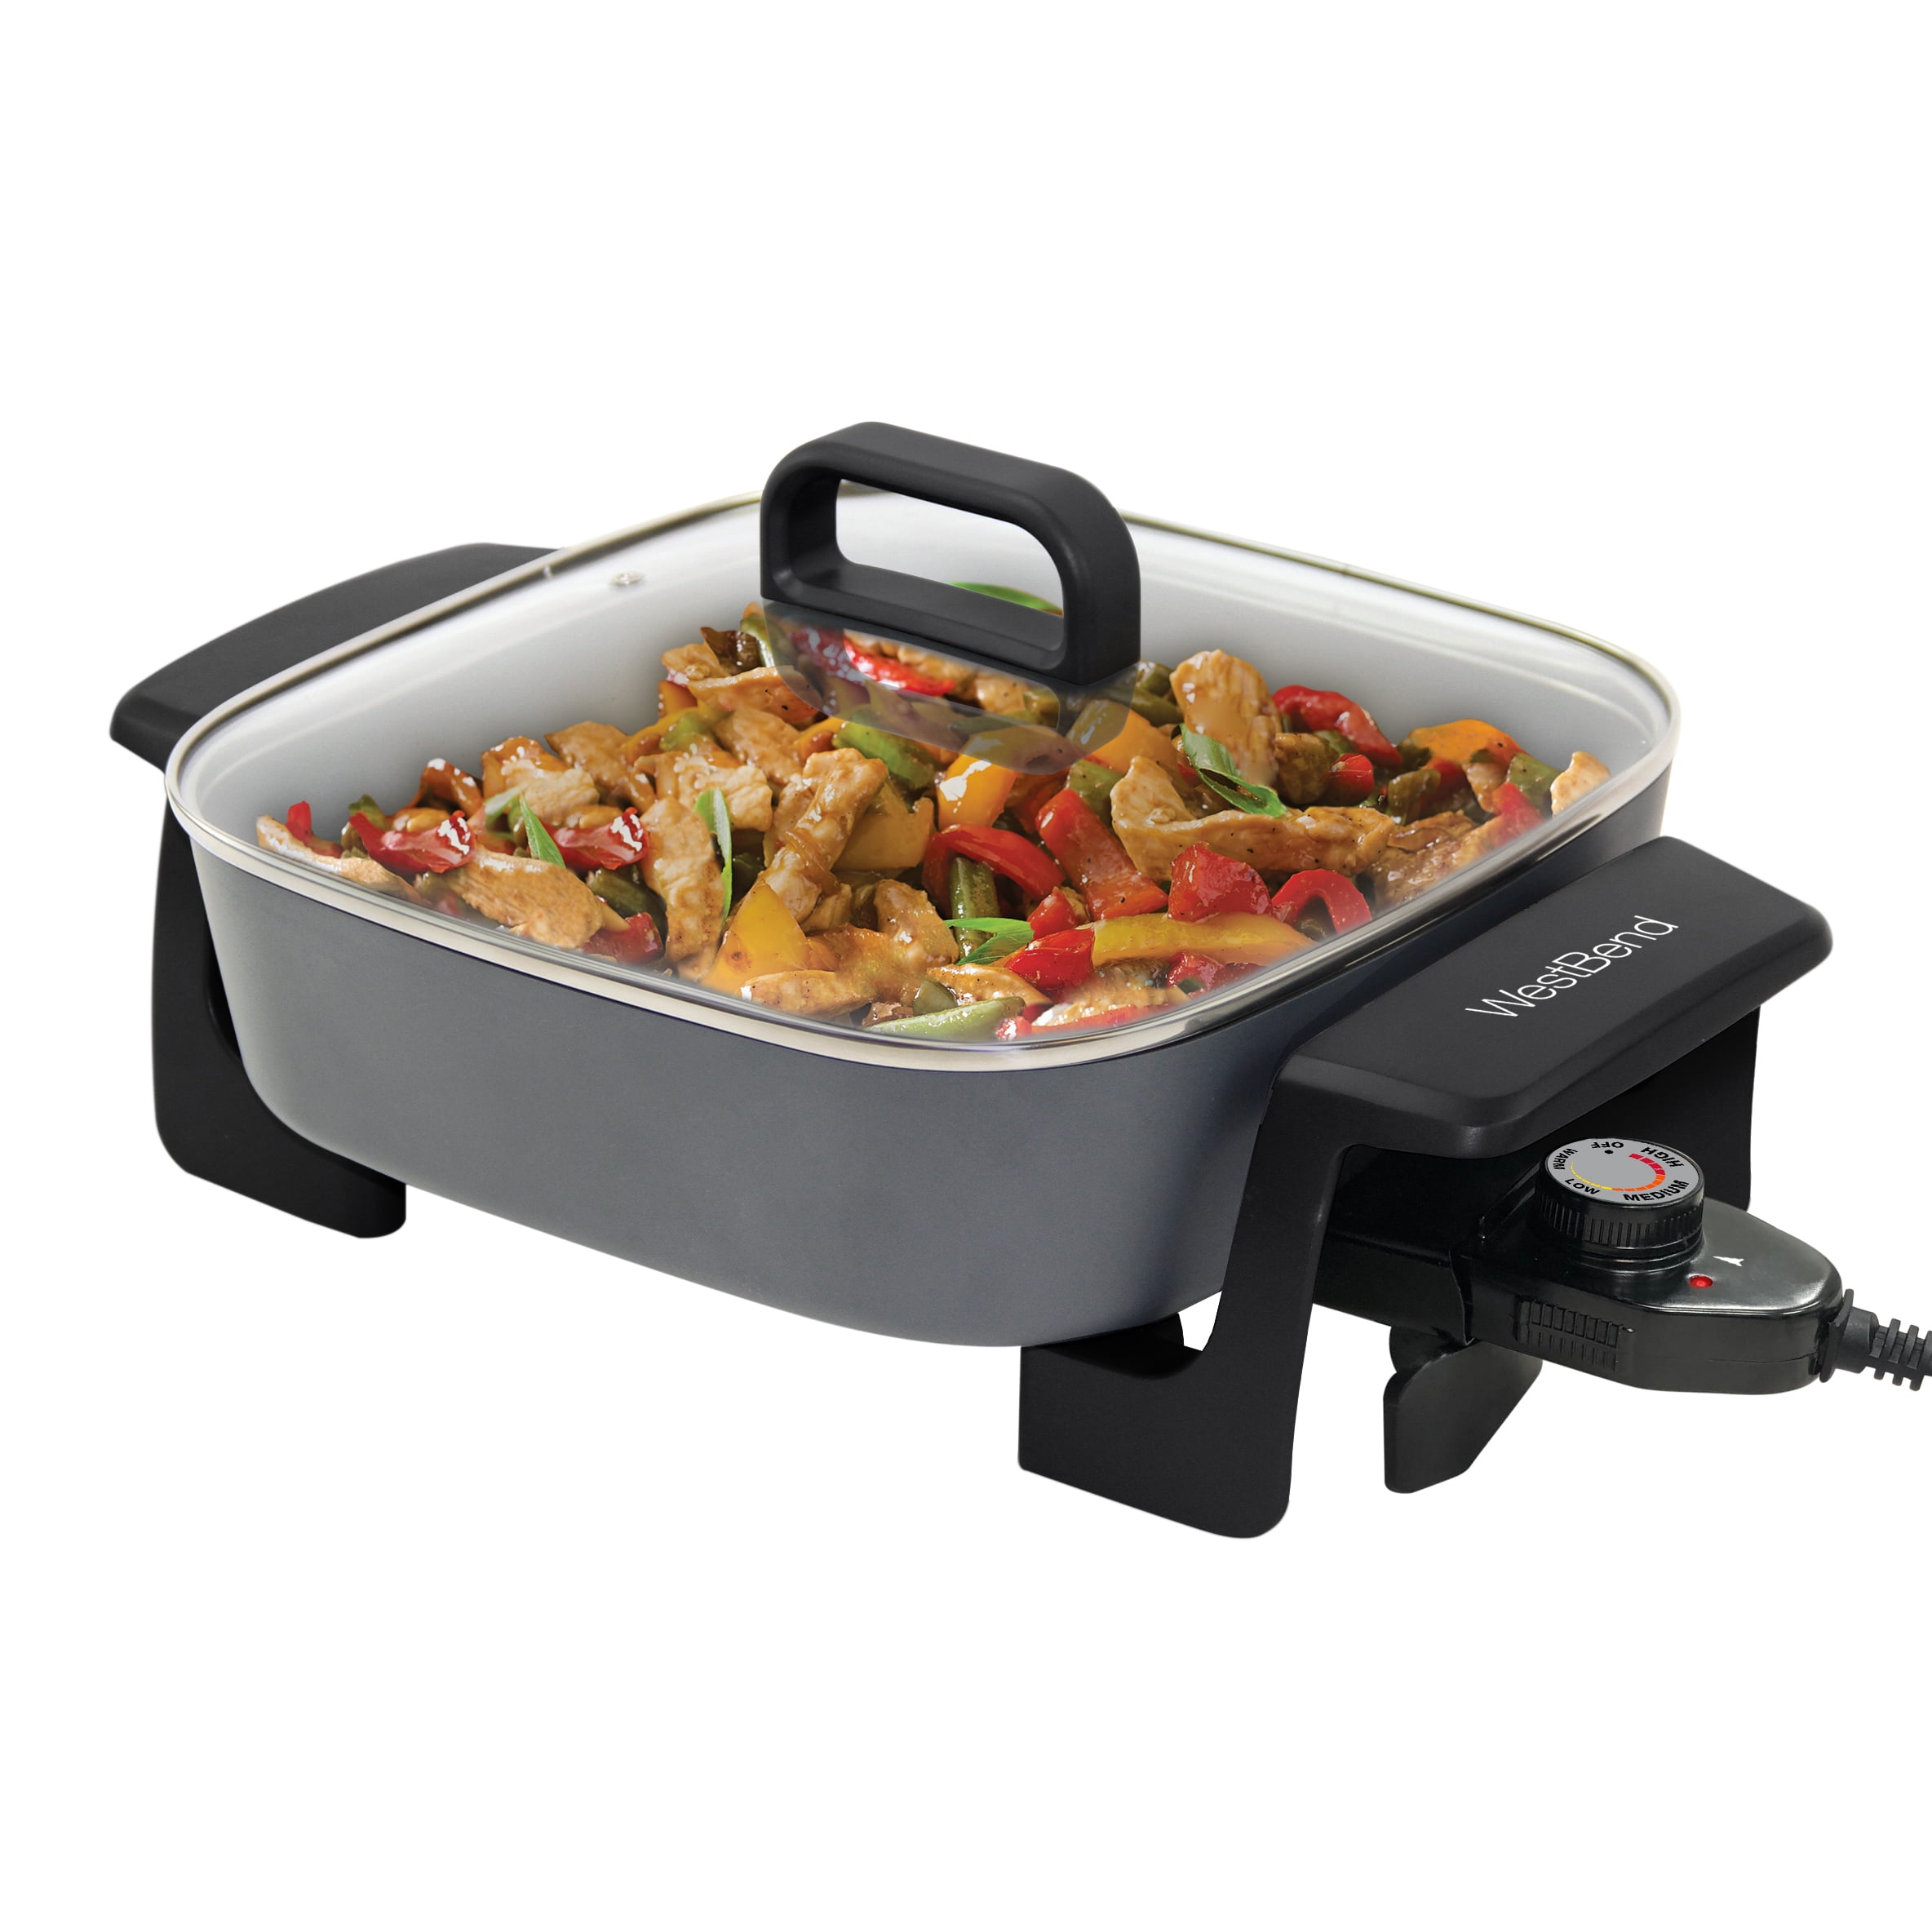 West Bend 12 Electric Skillet with Non-Stick Coating, in Black SKWB12BK13